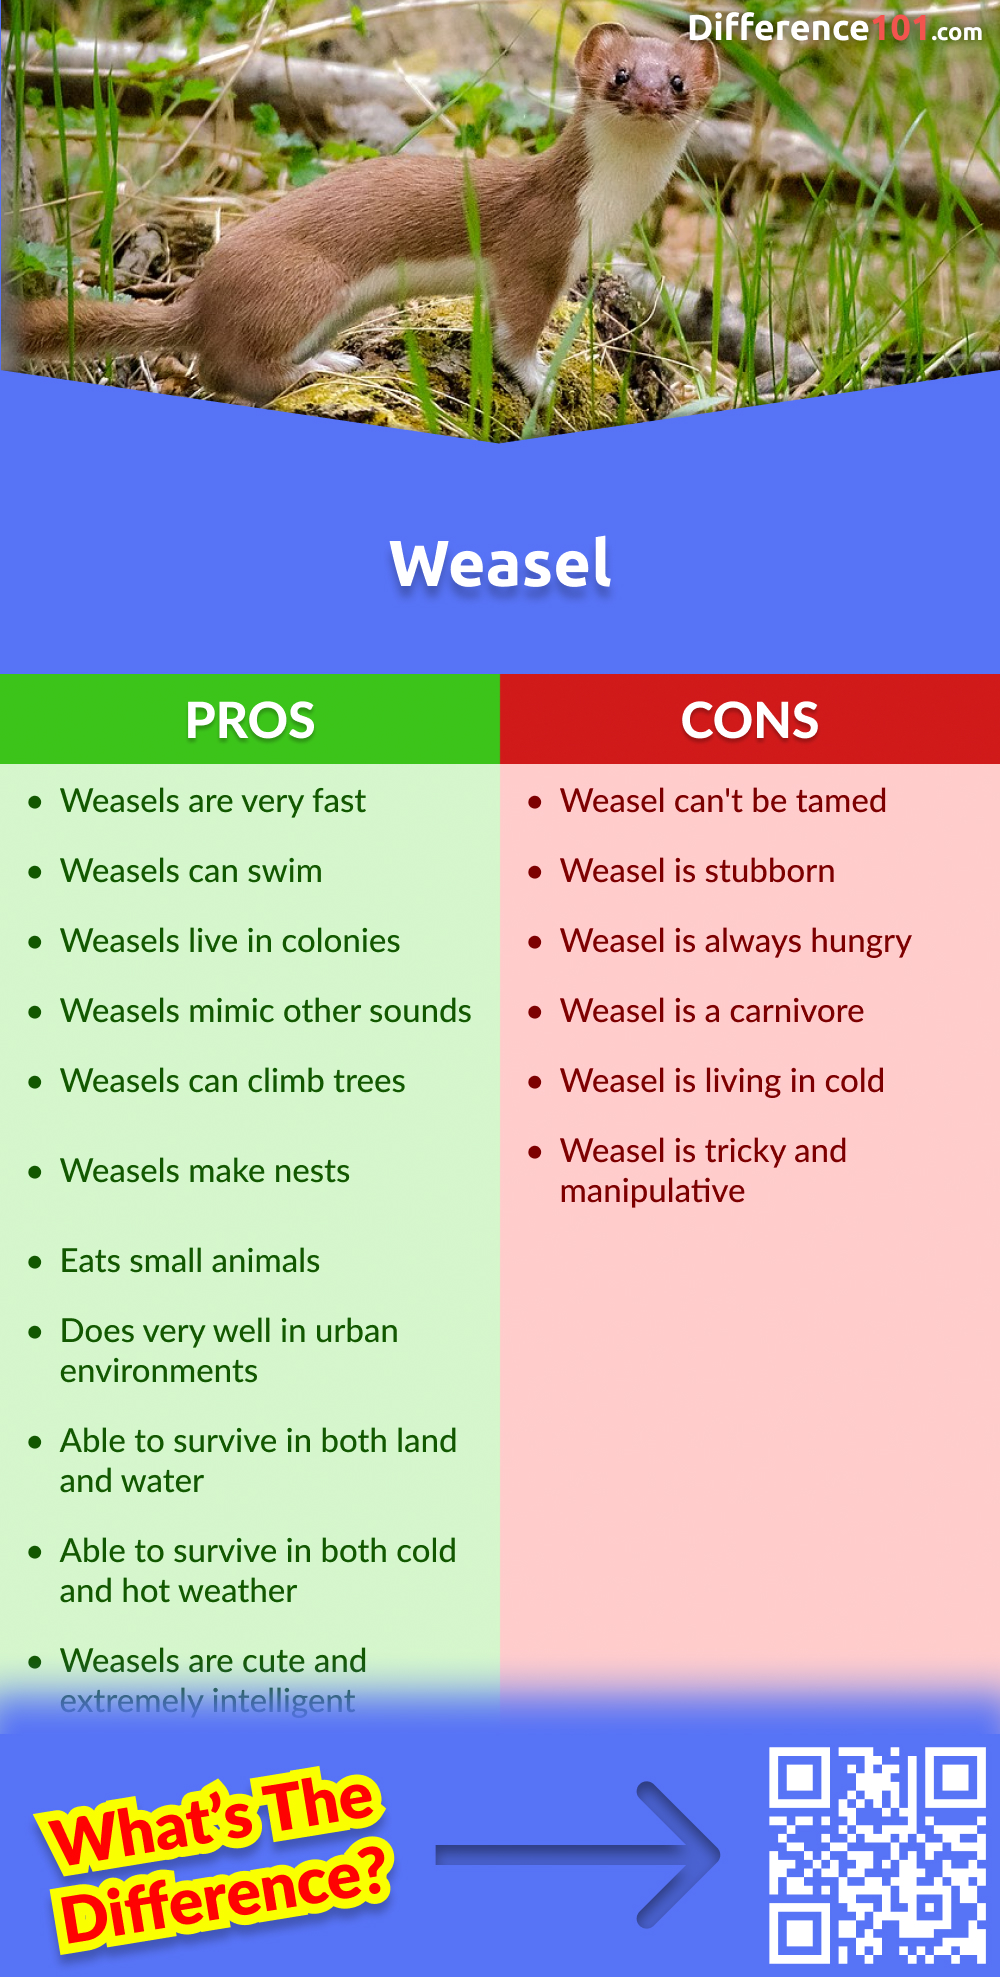 Weasel Pros & Cons
